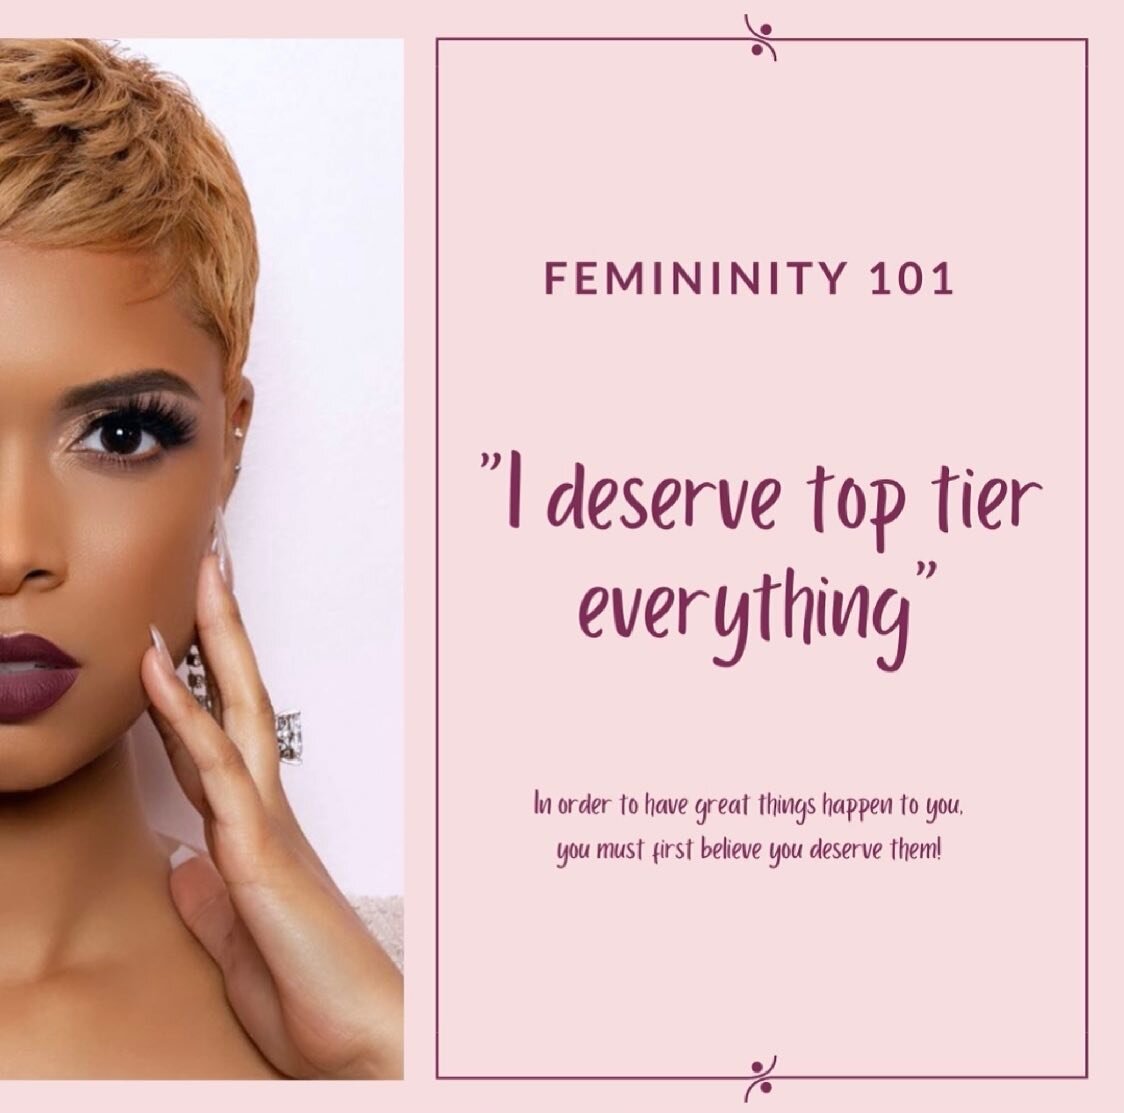 You have to first believe you deserve whatever it is you desire. 

And honey, you deserve it all! ✨
.
.
.
.
.
.
.
.
.
#lashes #minklashes #DMV #selfcare #expensive #instastories #reels #explorepage #infinity #forevergirls #prettygirls #luxury #pamper